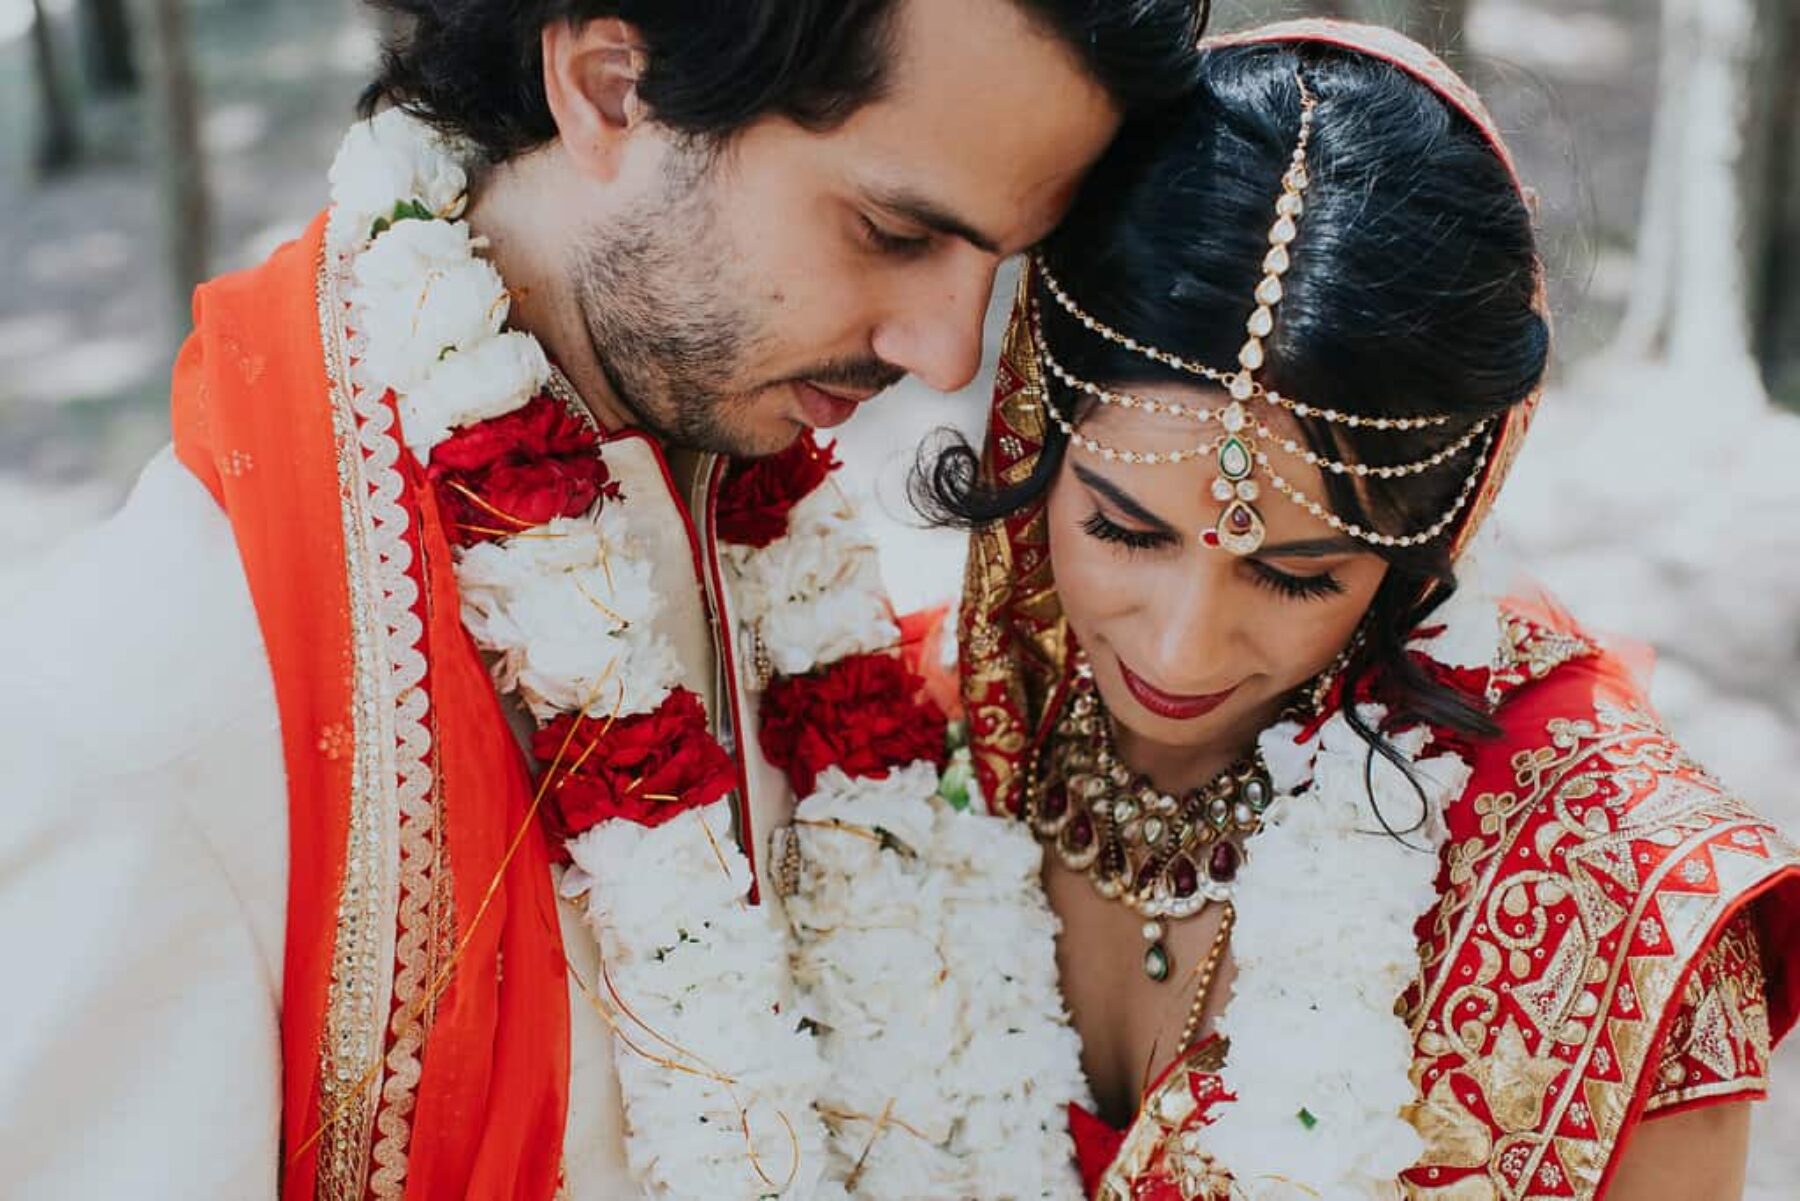 Hindu bride and groom in vibrant red and gold wedding attire